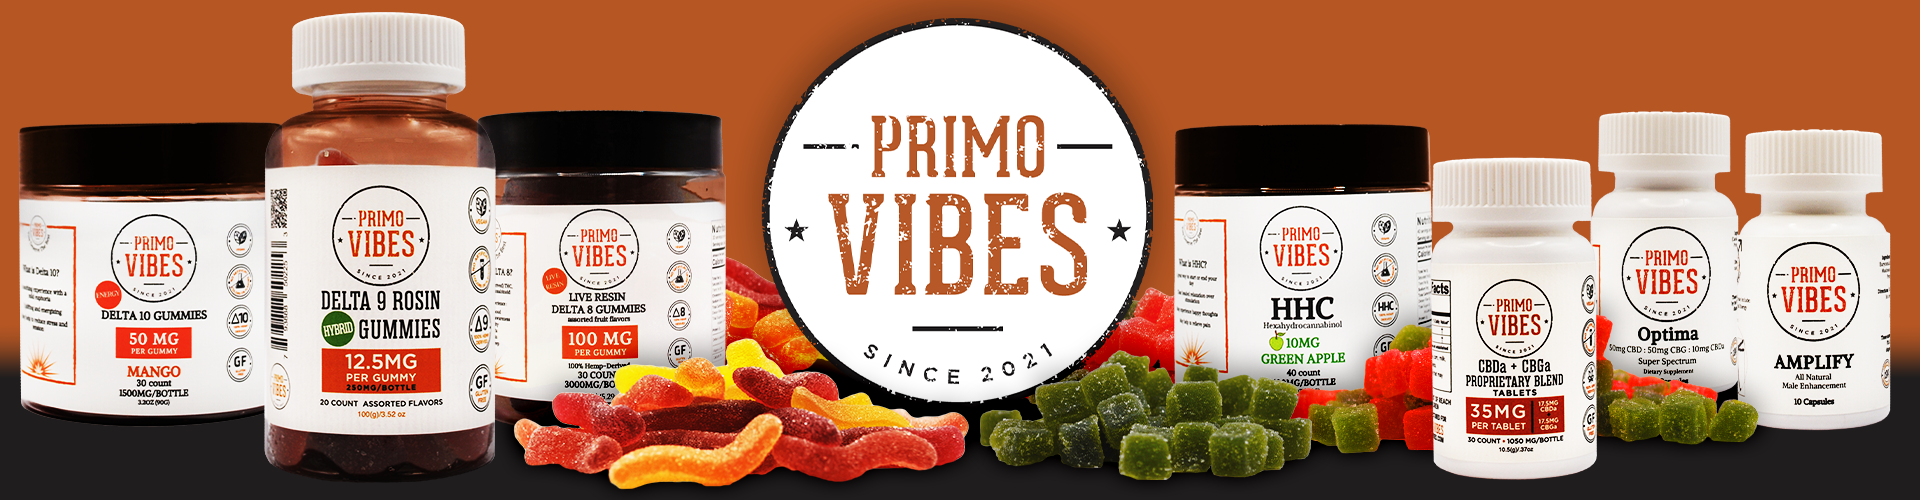 Primo Vibes Home Page Banner